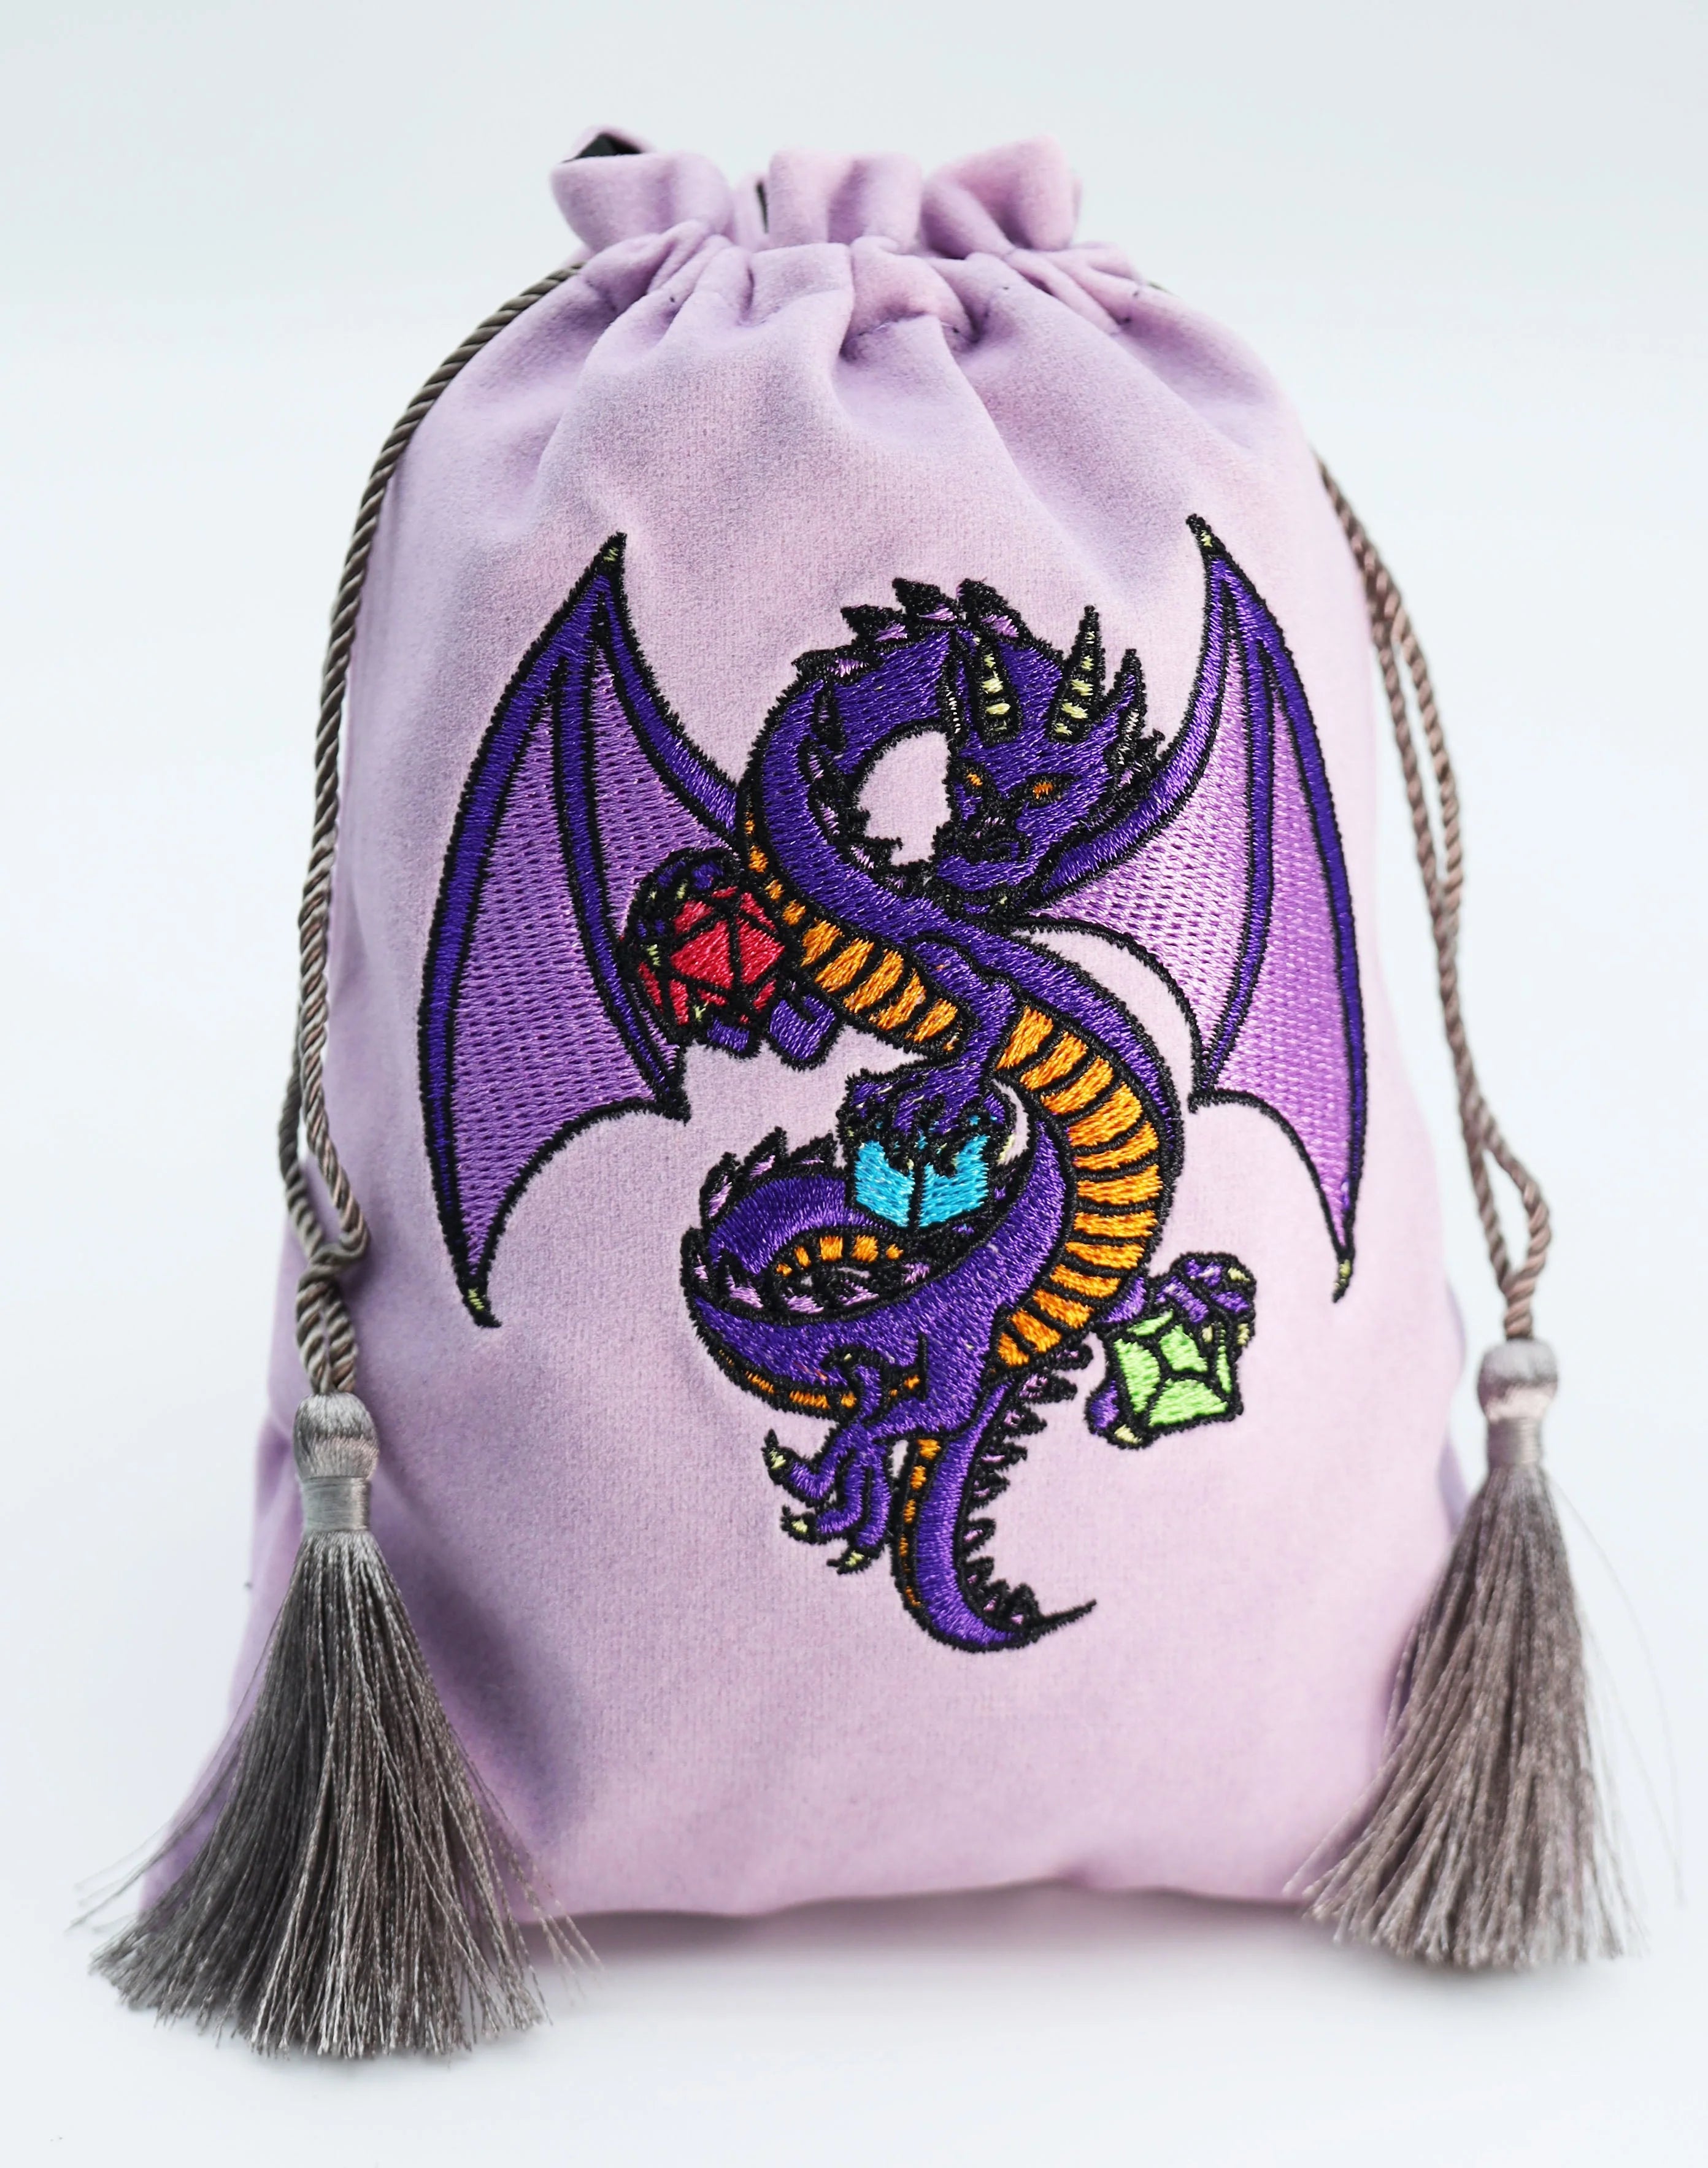 DICE BAG - PURPLE DRAGON Dice & Counters Foam Brain Games    | Red Claw Gaming